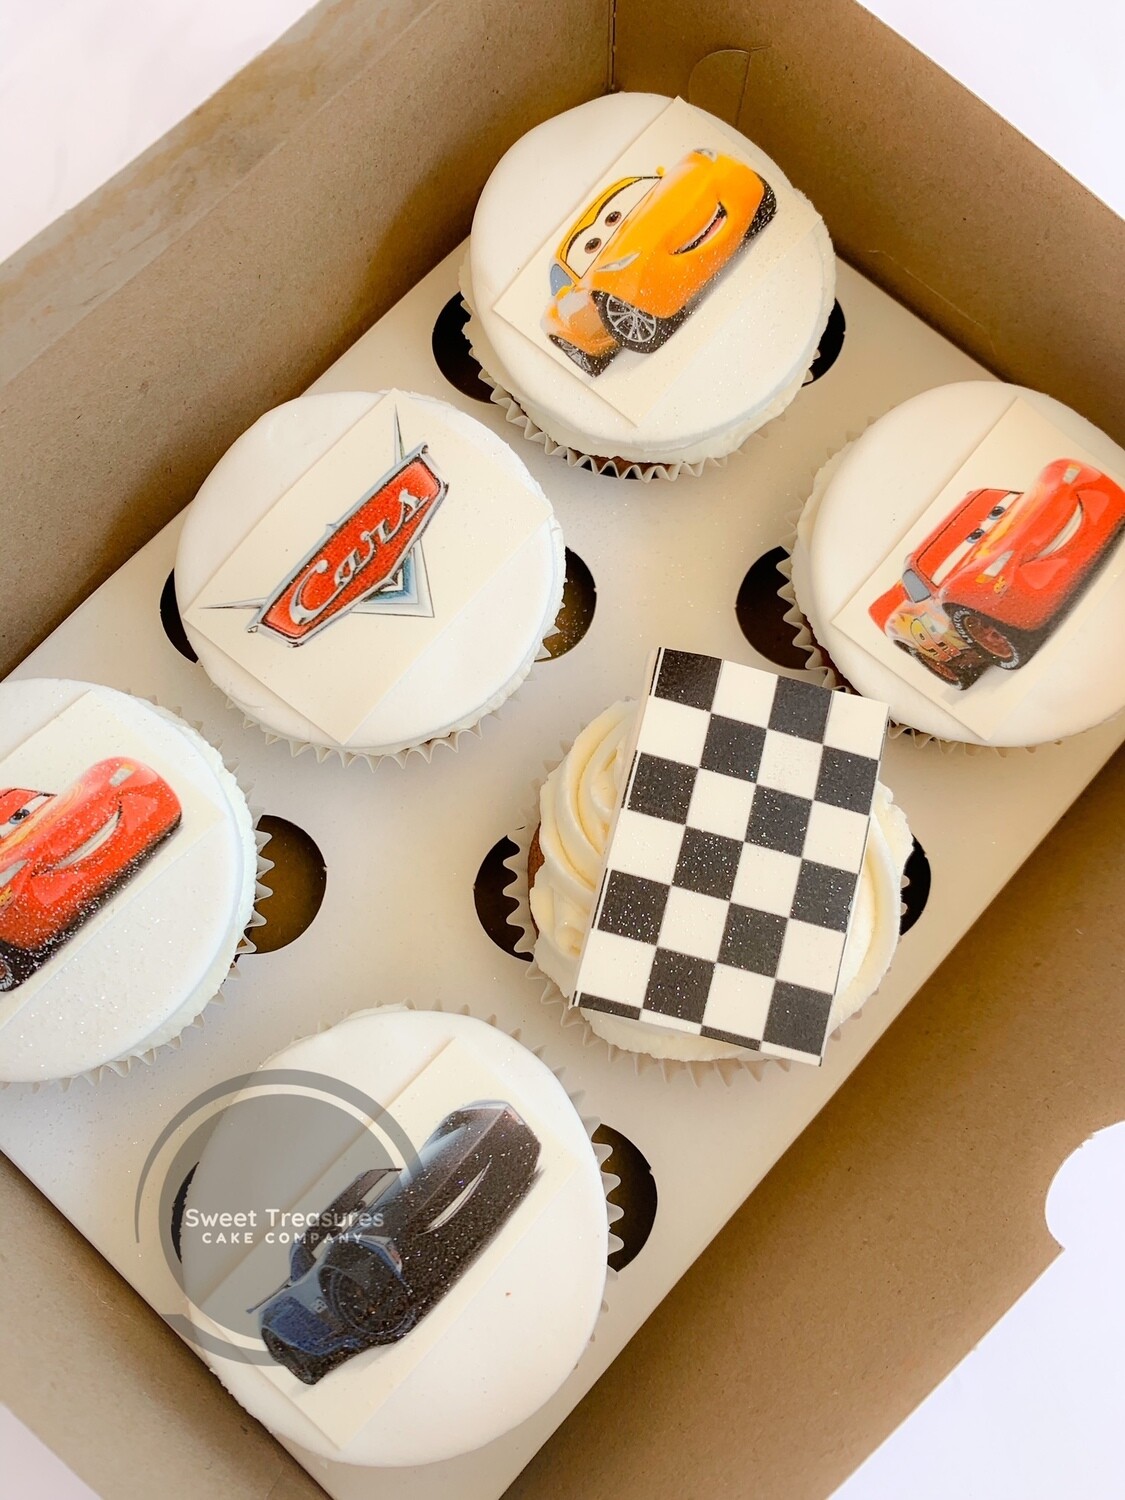 Cars themed cupcakes